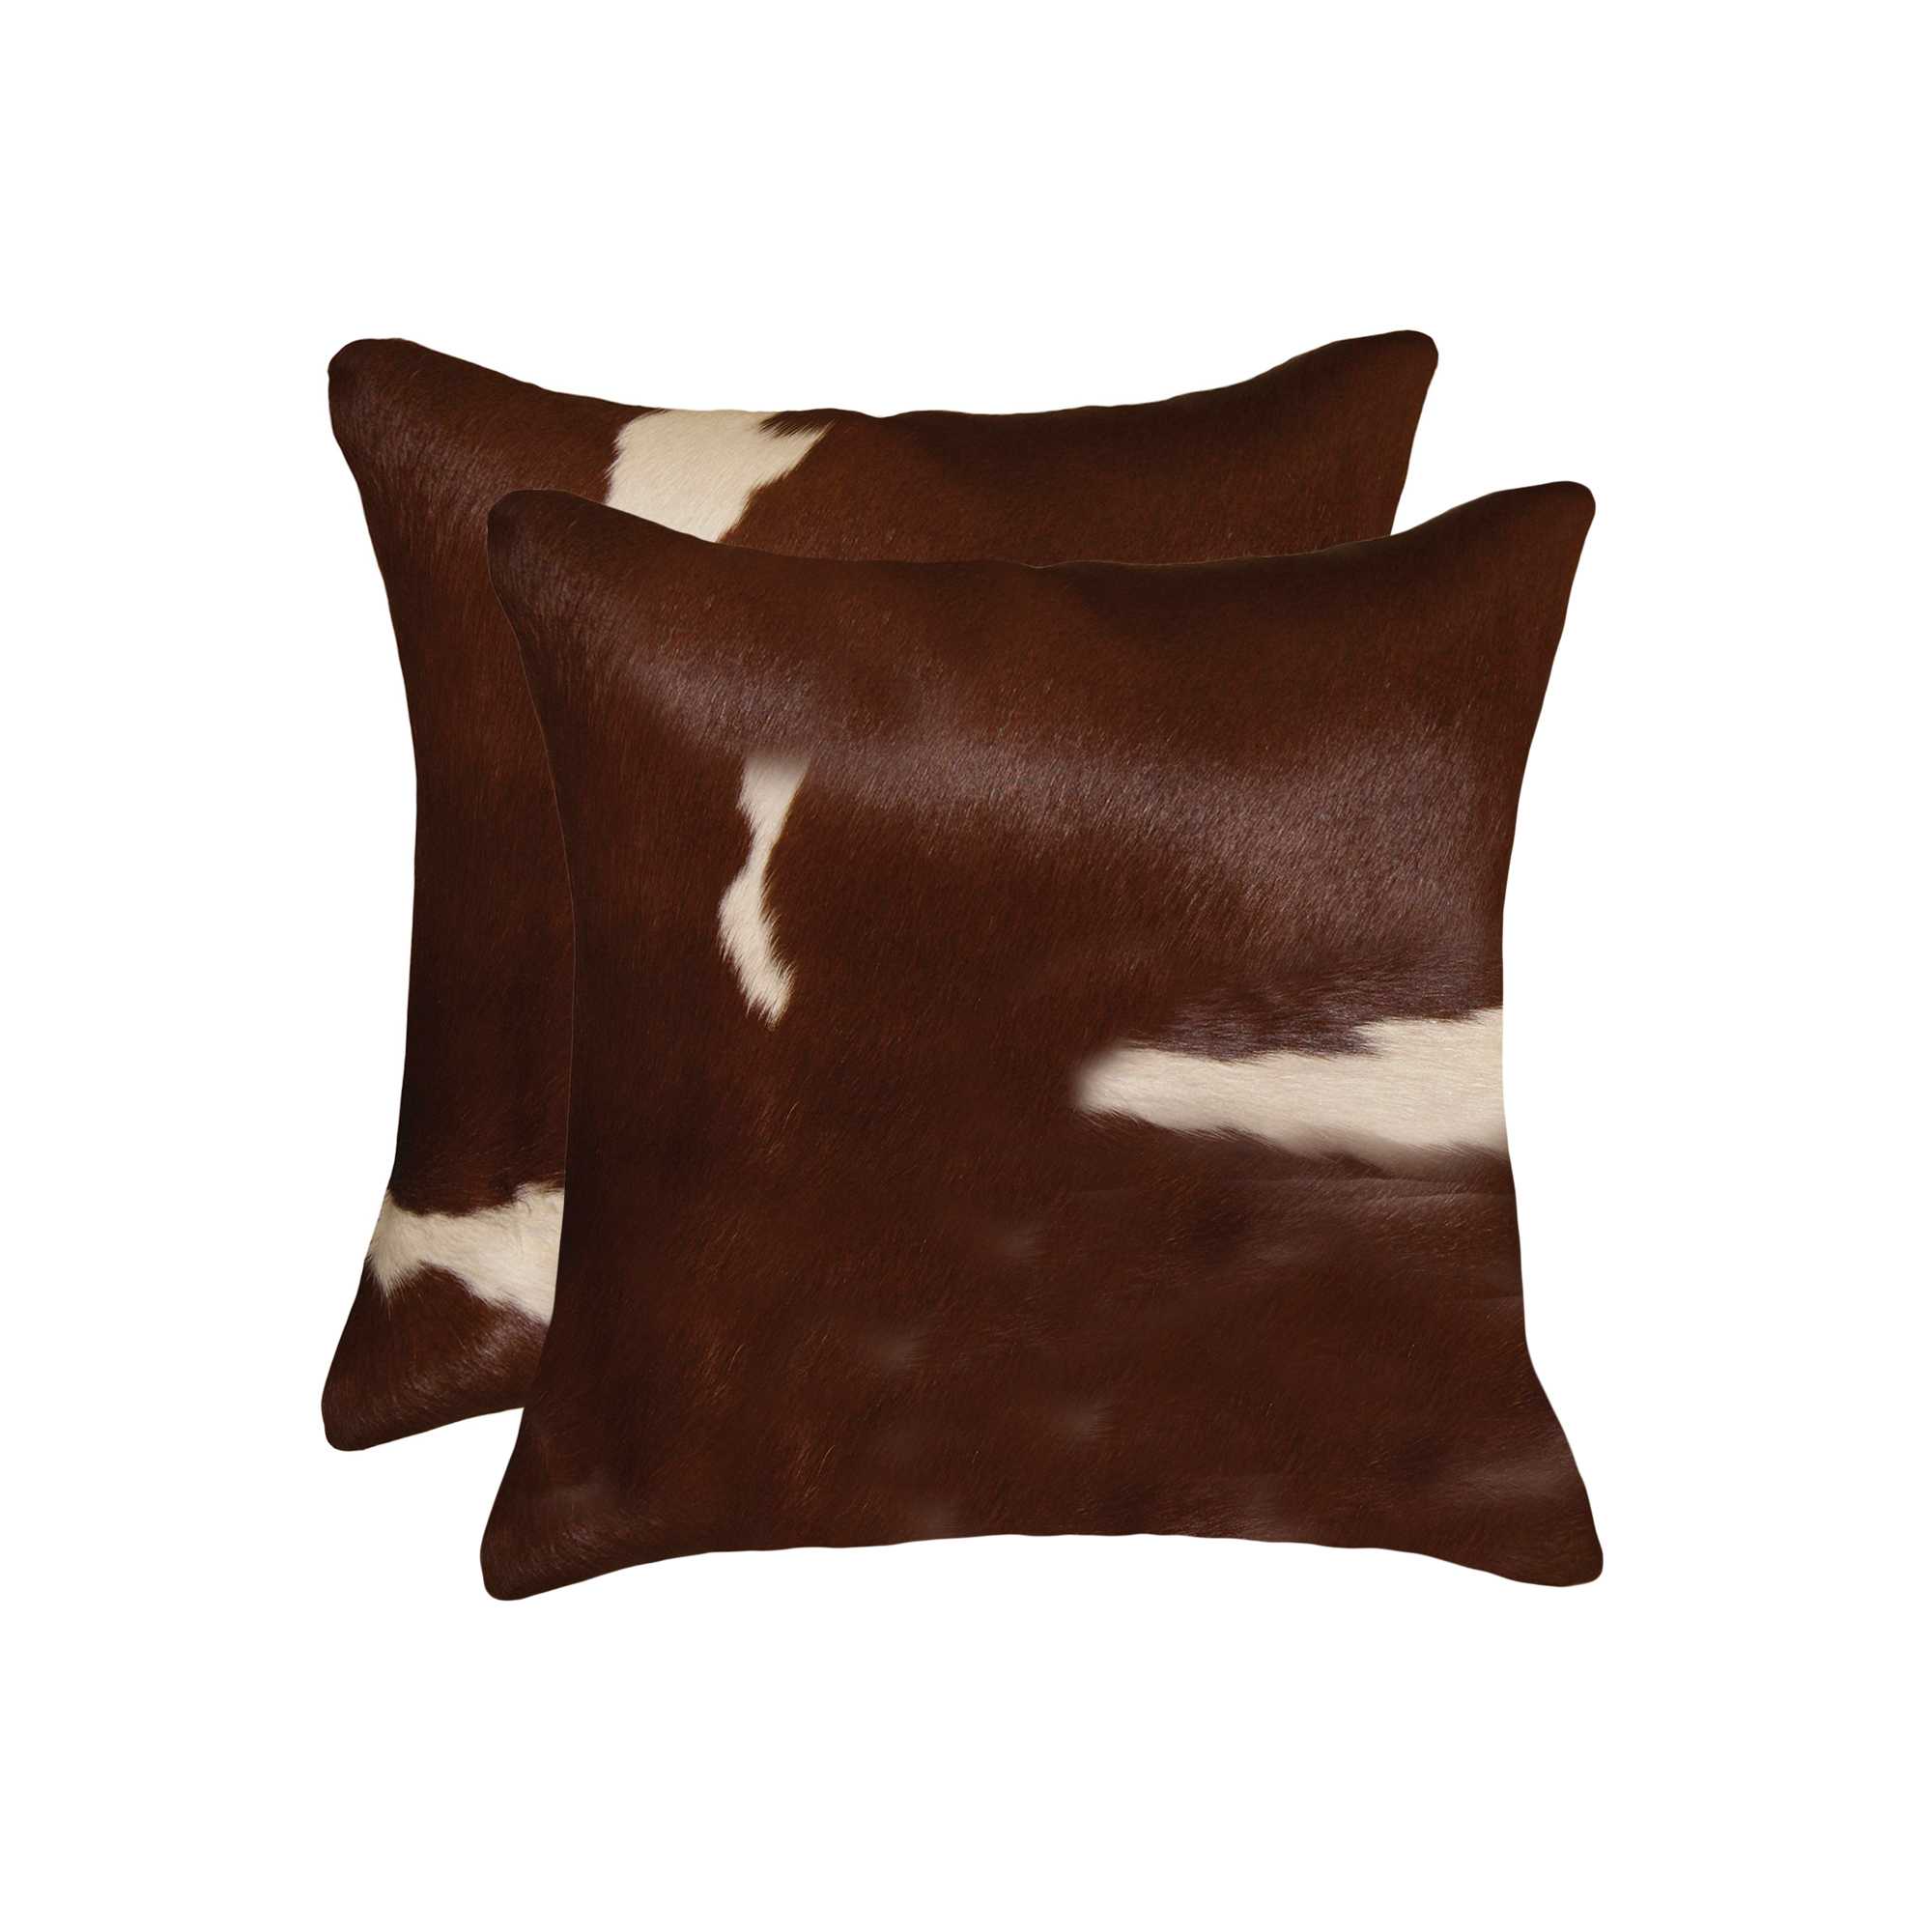 18" x 18" x 5" Brown And White, Cowhide - Pillow 2-Pack